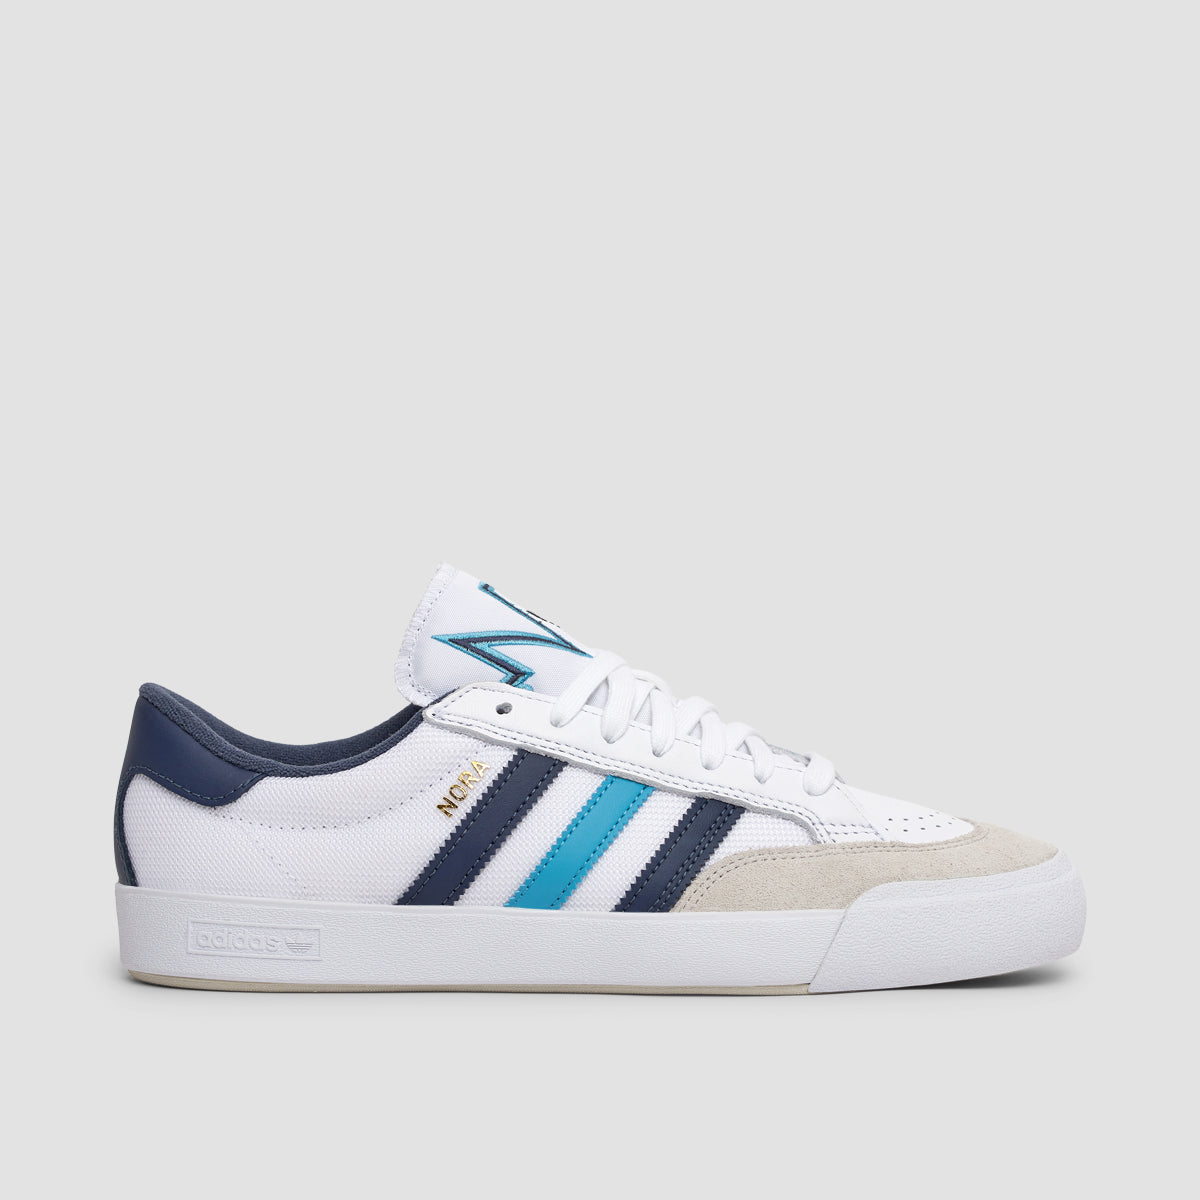 adidas Nora Shoes - Footwear White/Pre Blue/Shadow Navy